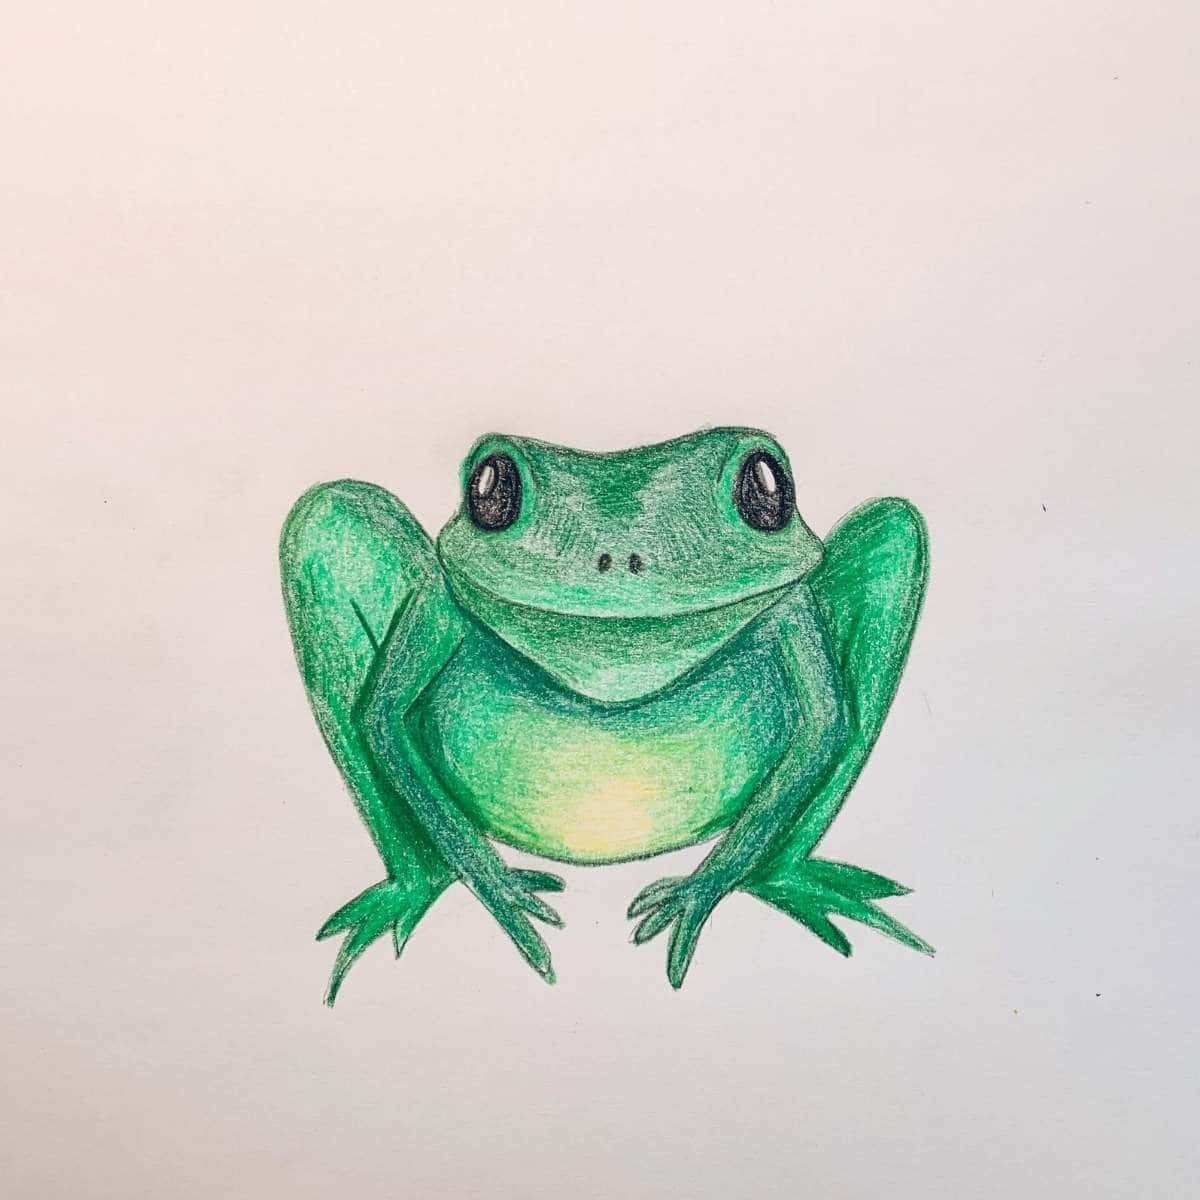 A Drawing Of A Green Frog